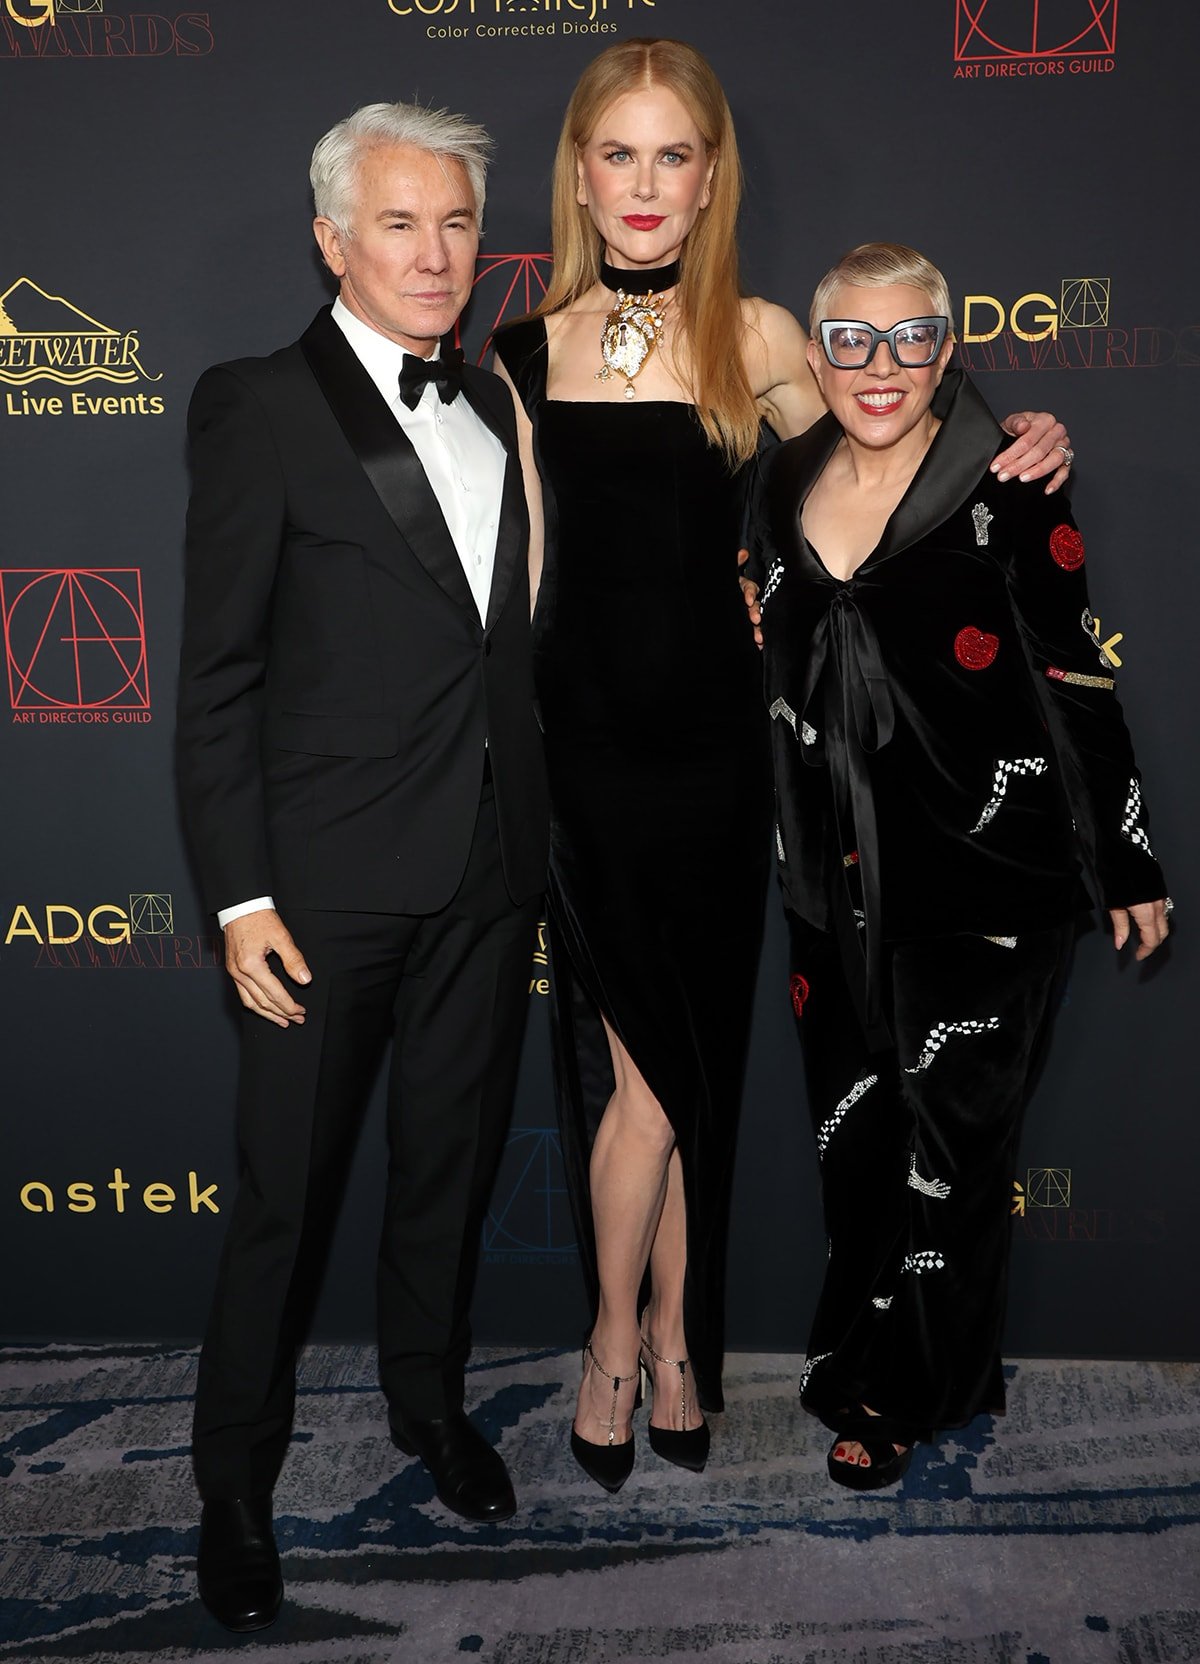 Nicole Kidman with Baz Luhrmann and his wife Catherine Martin at the 2023 ADG Awards